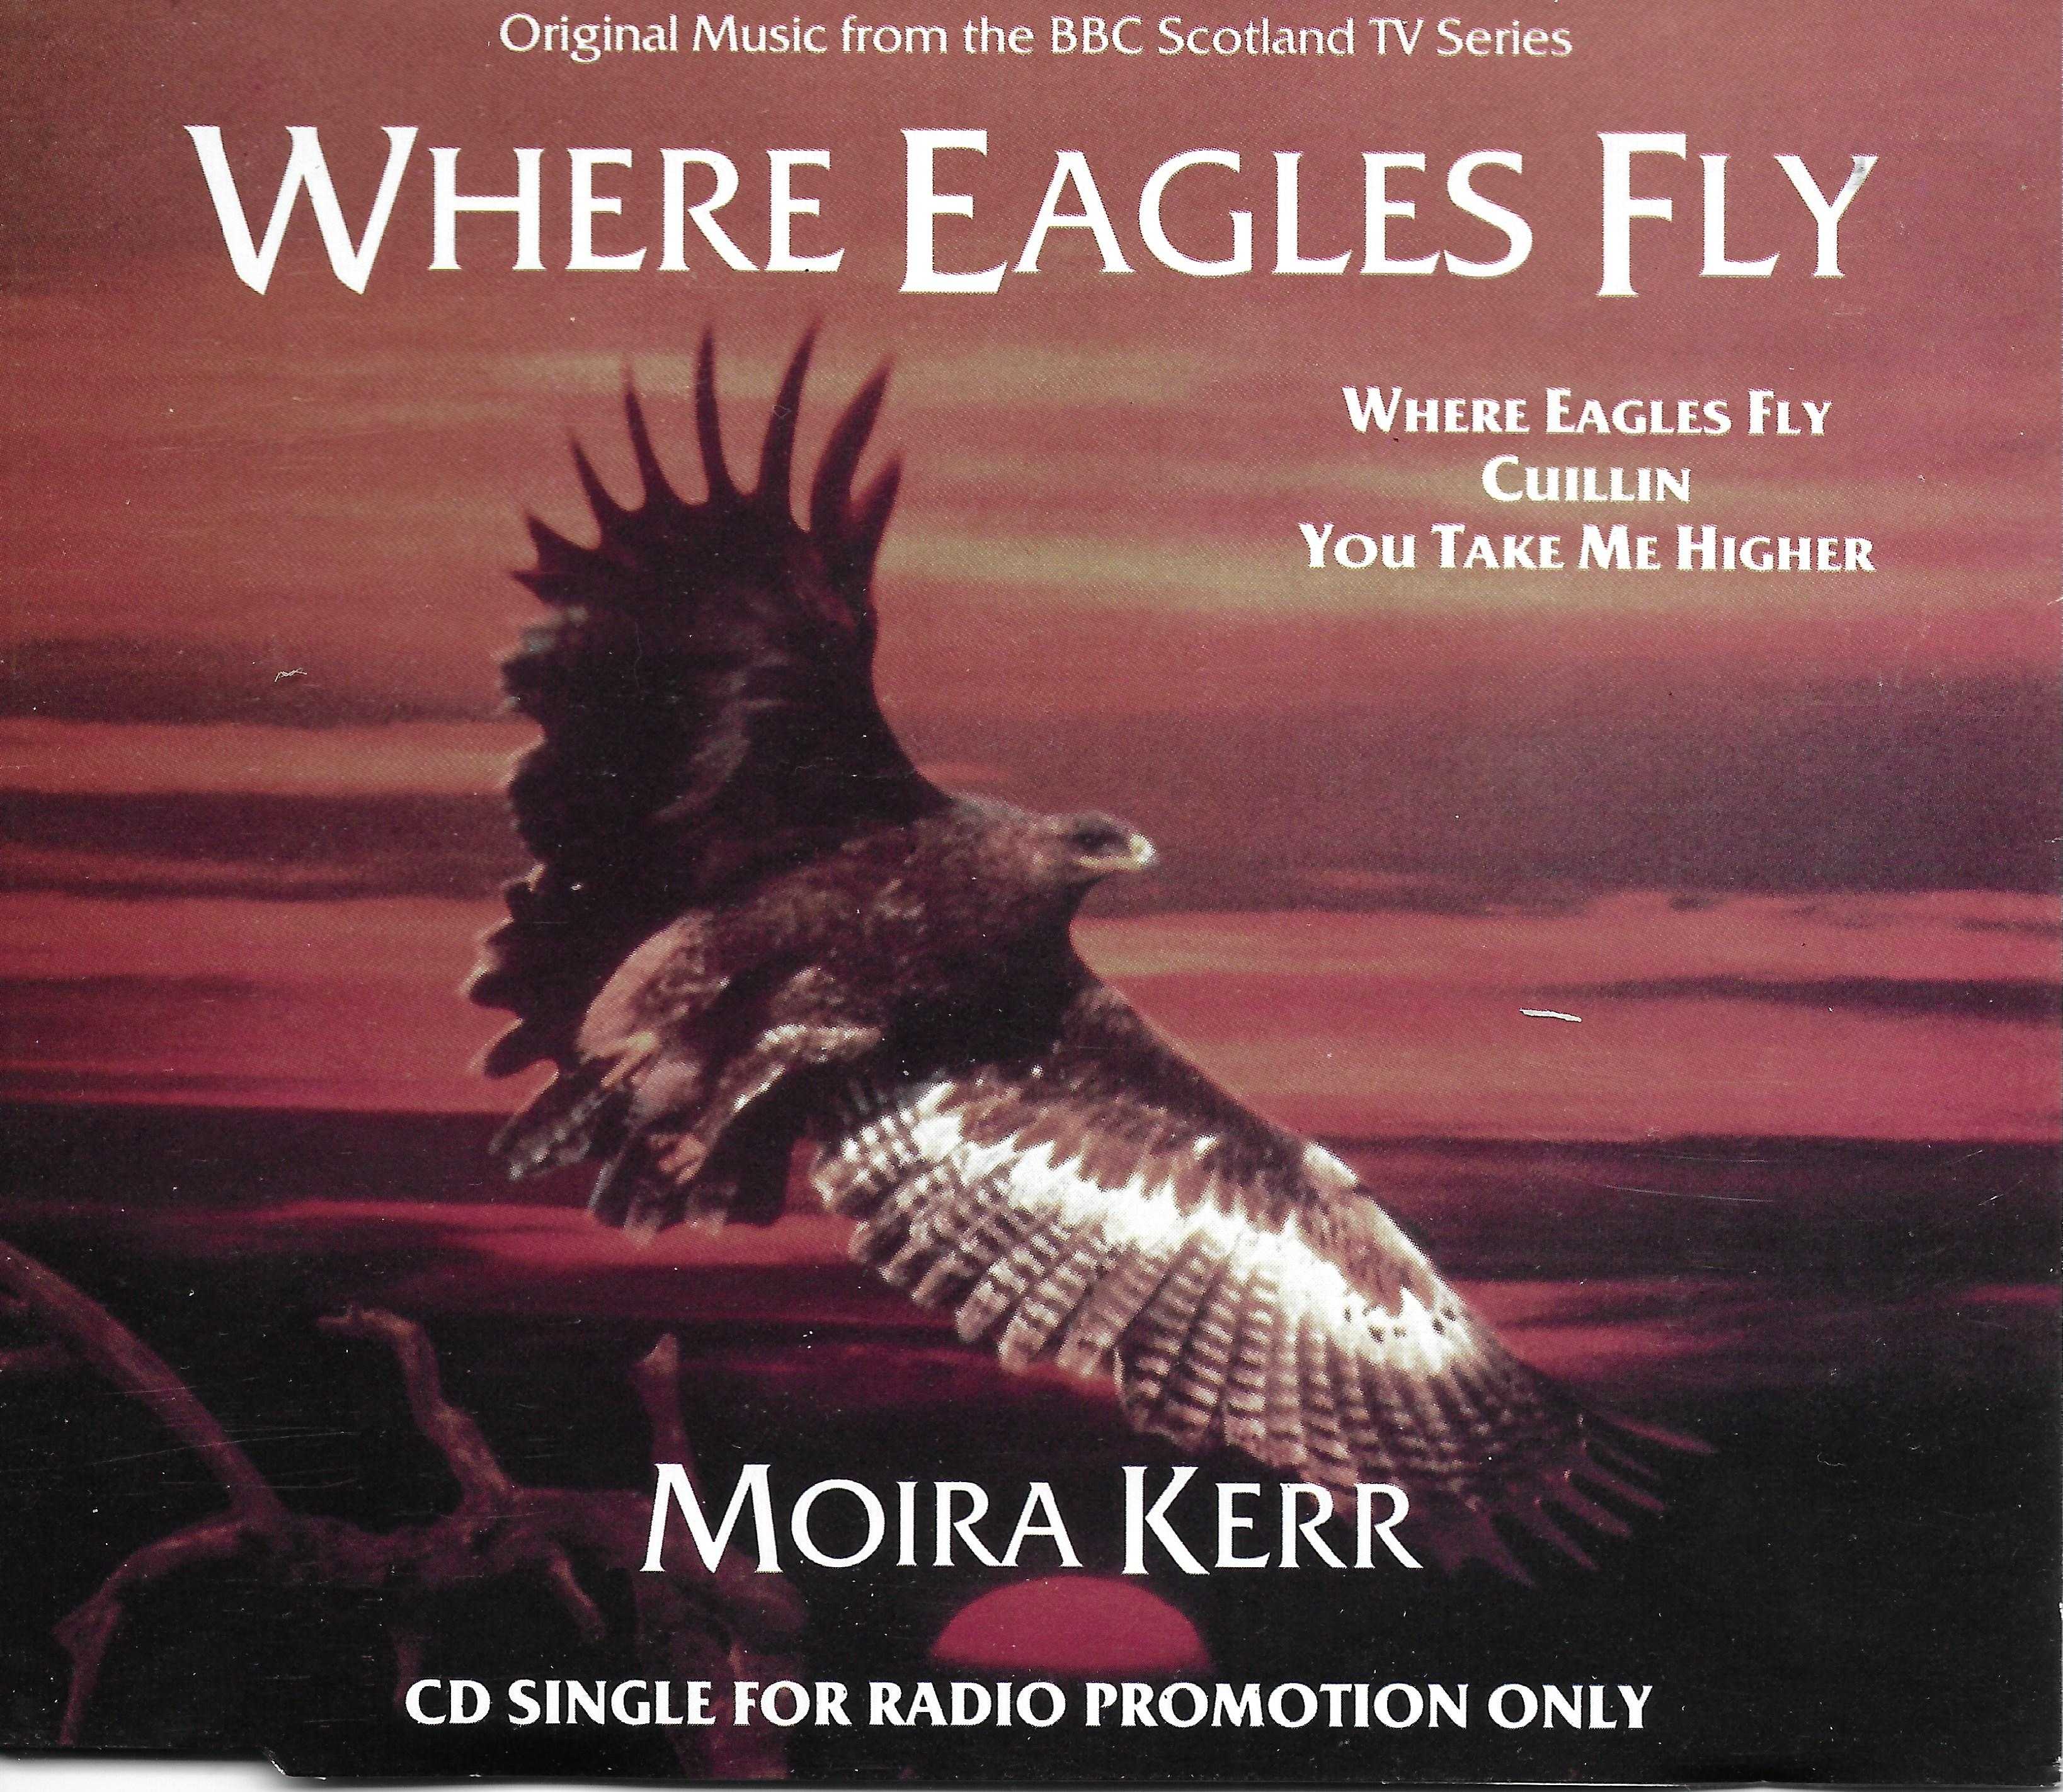 Picture of Where eagles fly by artist Moira Kerr from the BBC cdsingles - Records and Tapes library